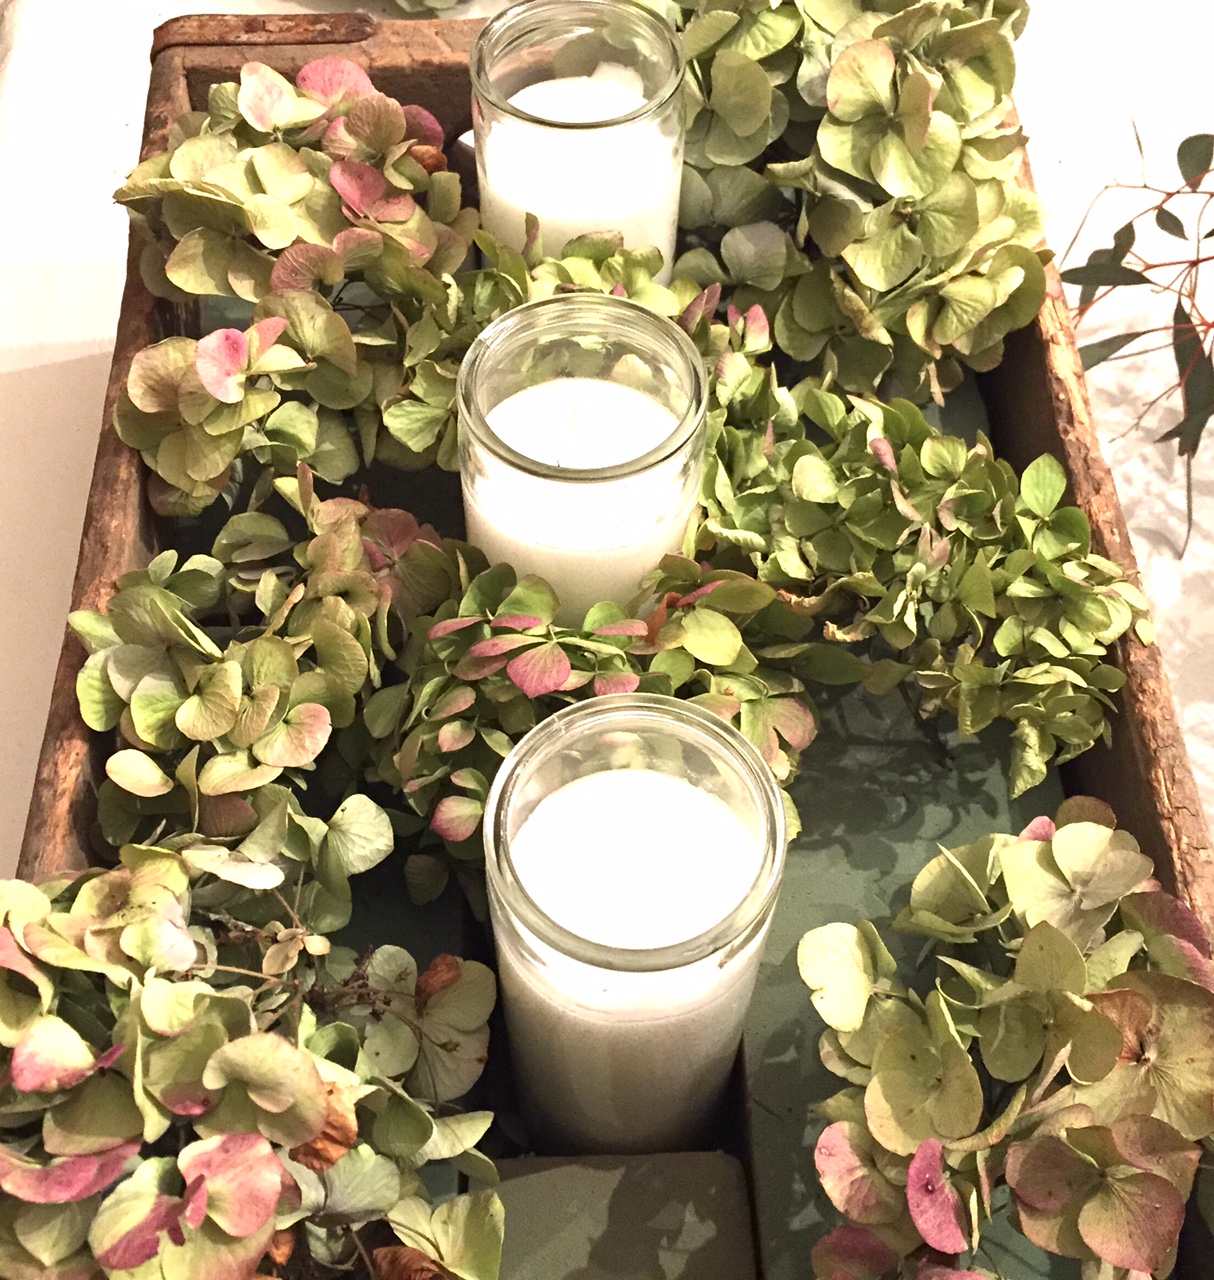 Large wooden box with floral foam, three glass candles and dried hydrangea flowers.